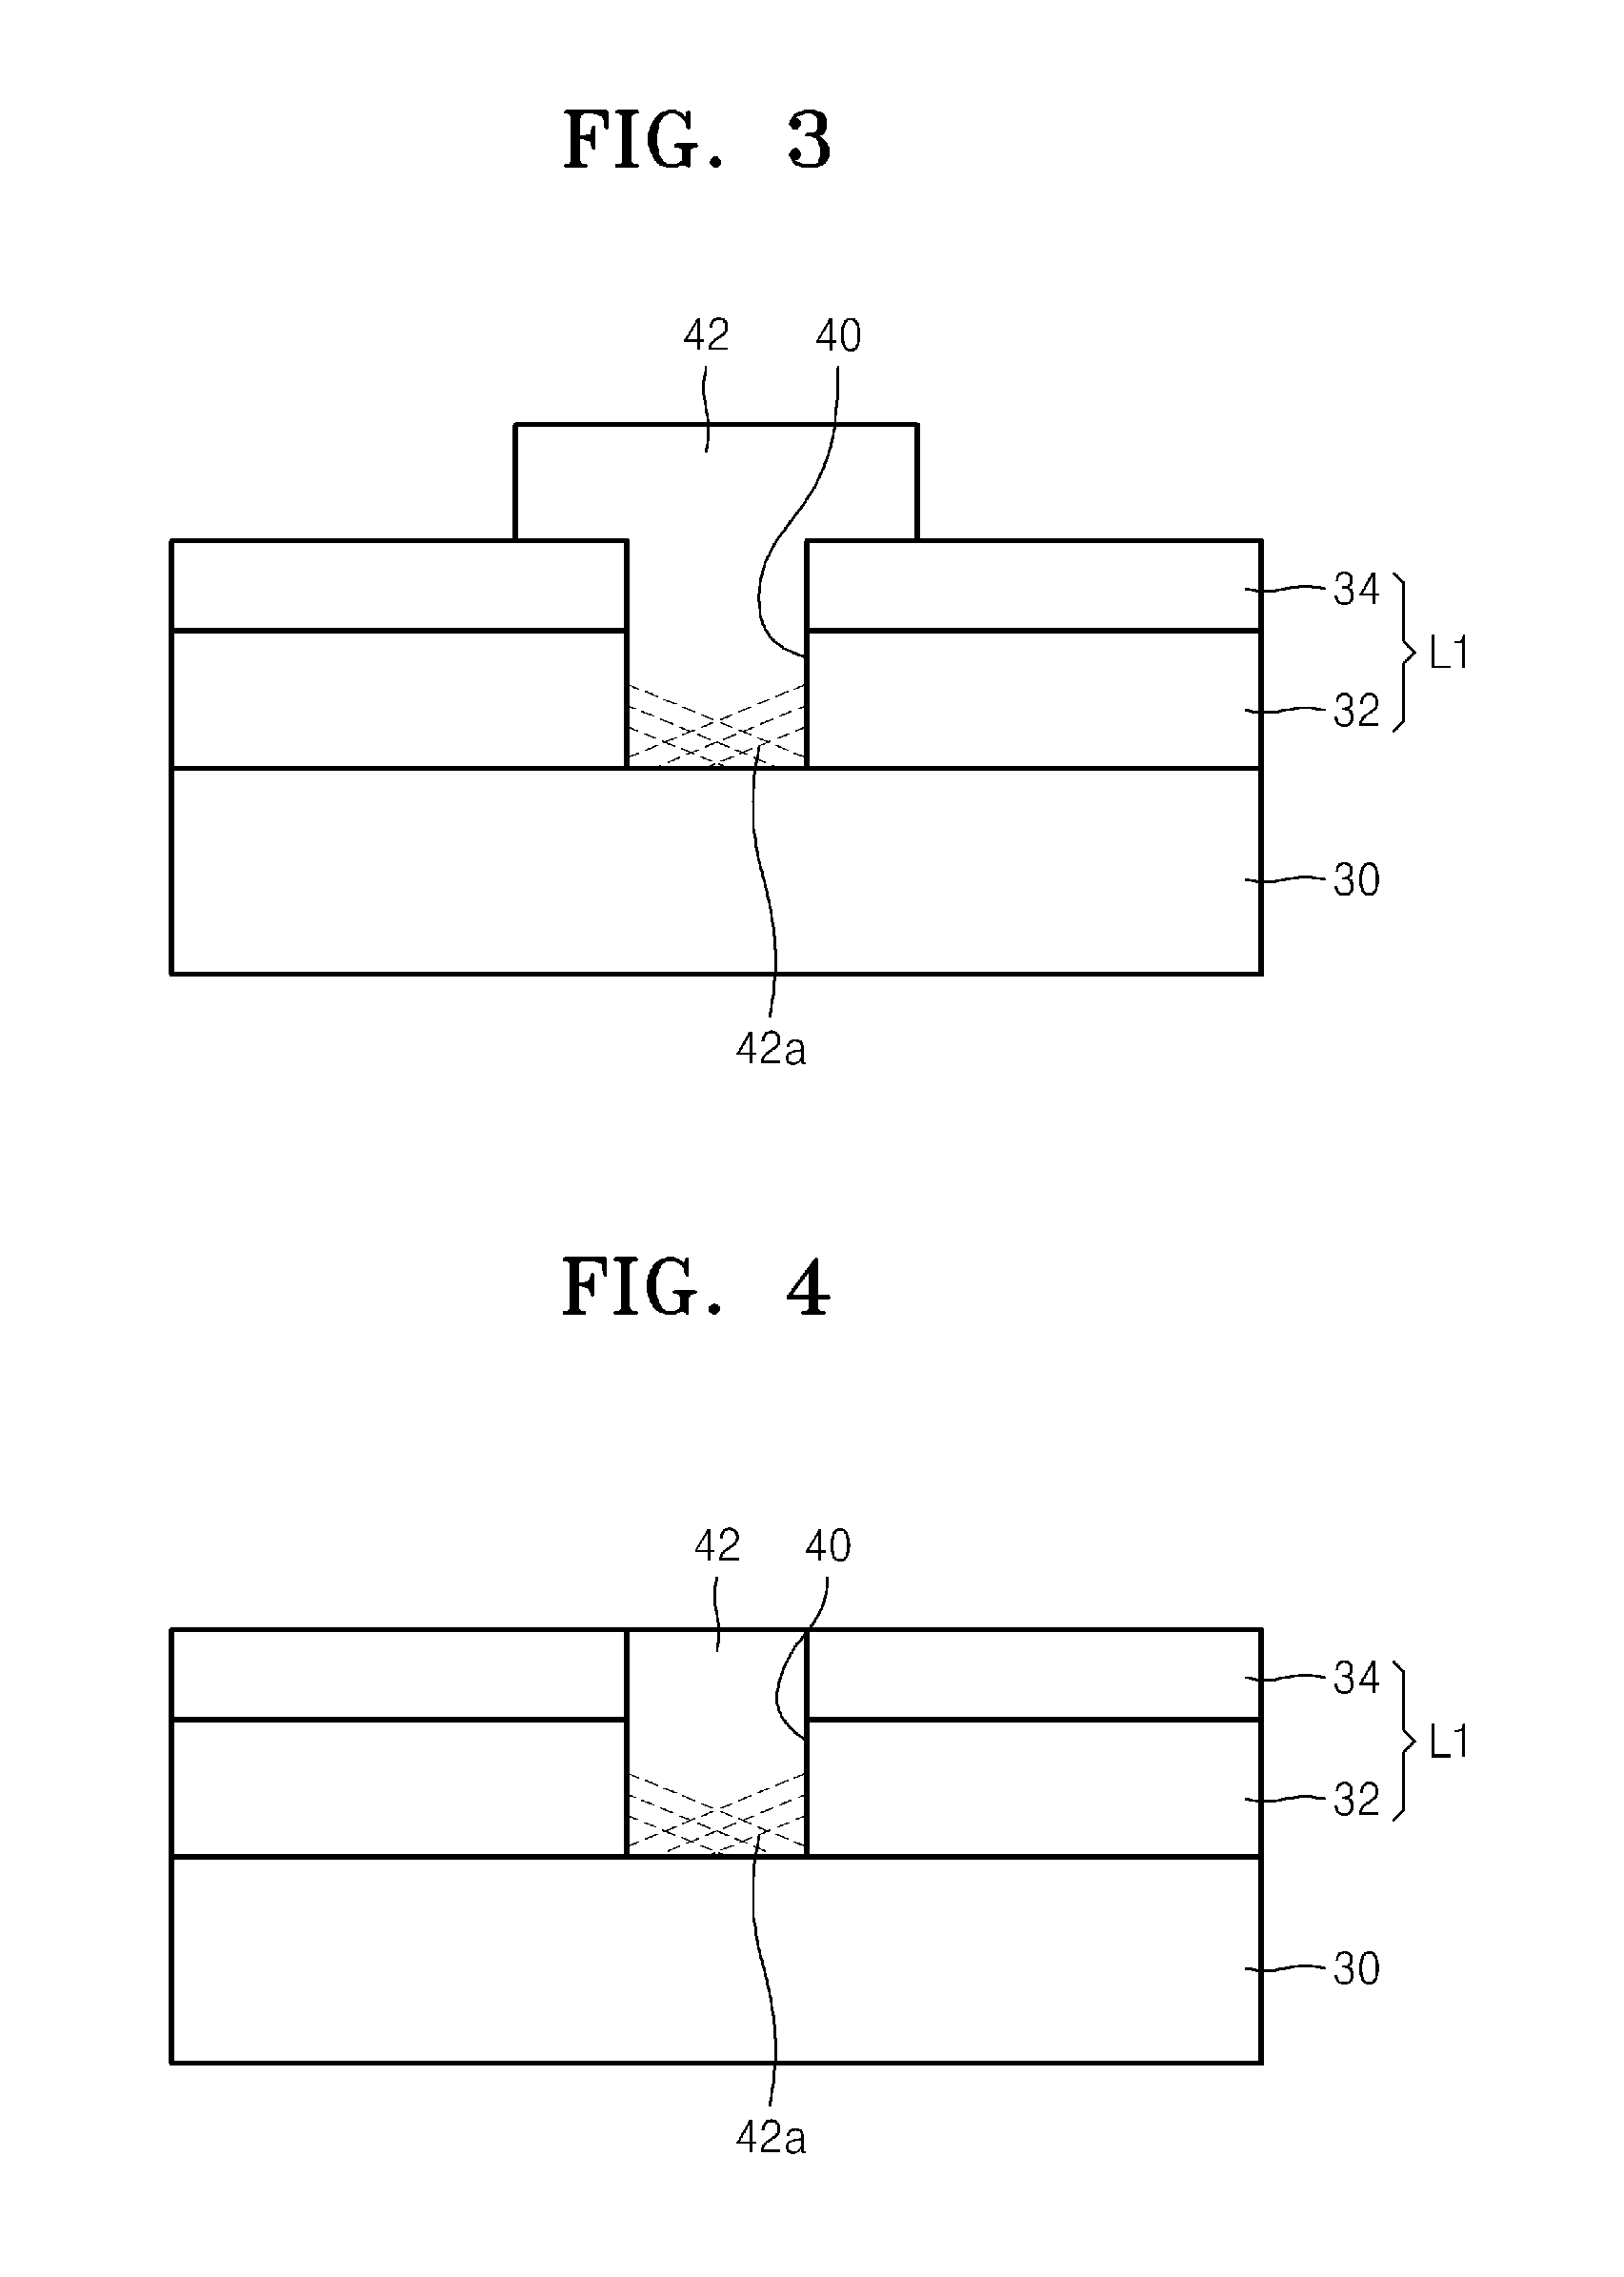 Semiconductor device including a gate electrode on a protruding group III-V material layer and method of manufacturing the semiconductor device